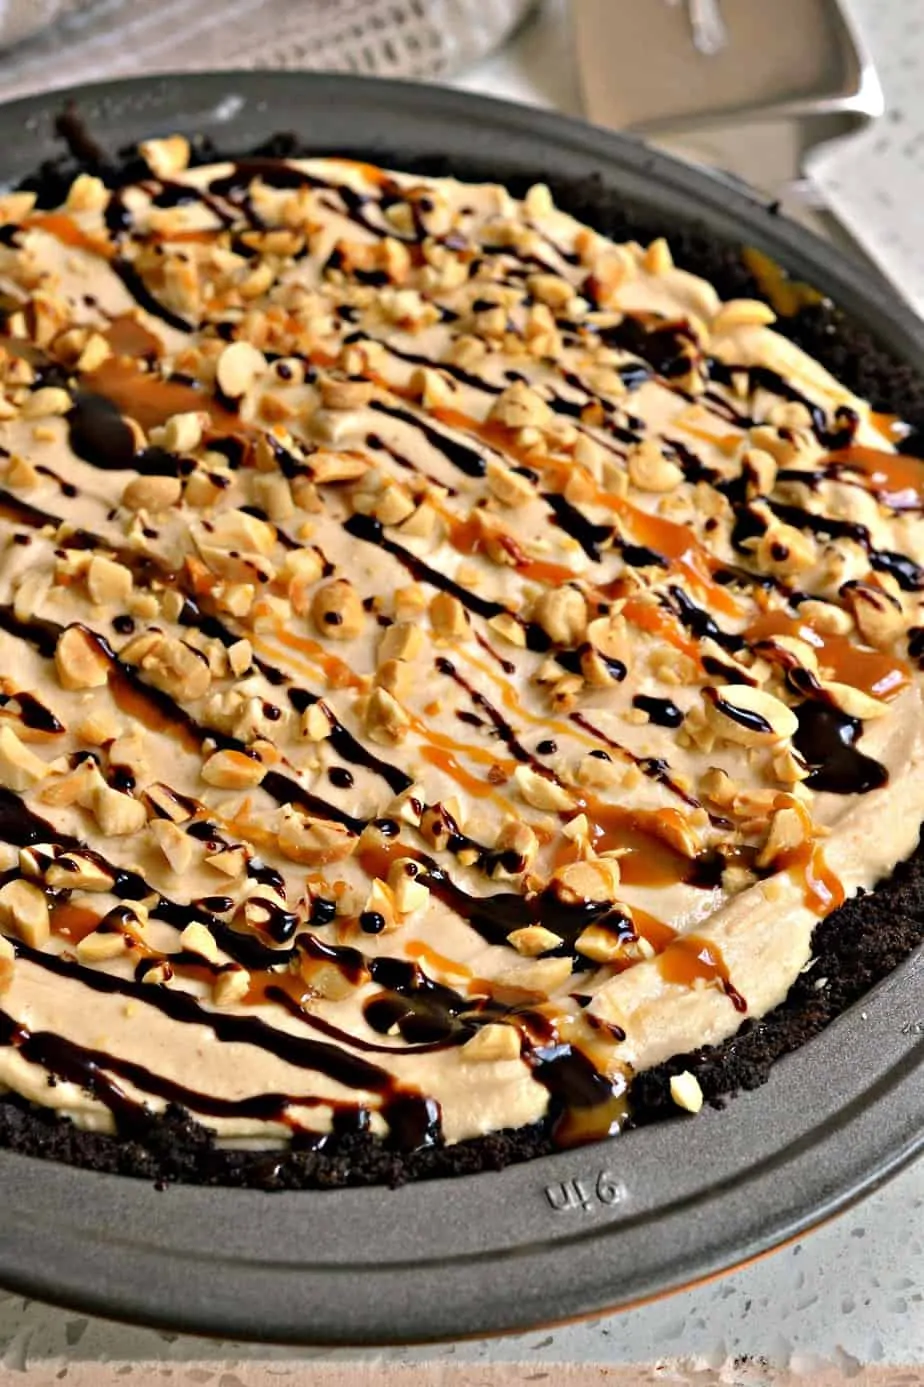 This easy Peanut Butter Pie is sure to please all your peanut butter lovers with a chocolate crust and cream cheese filling.